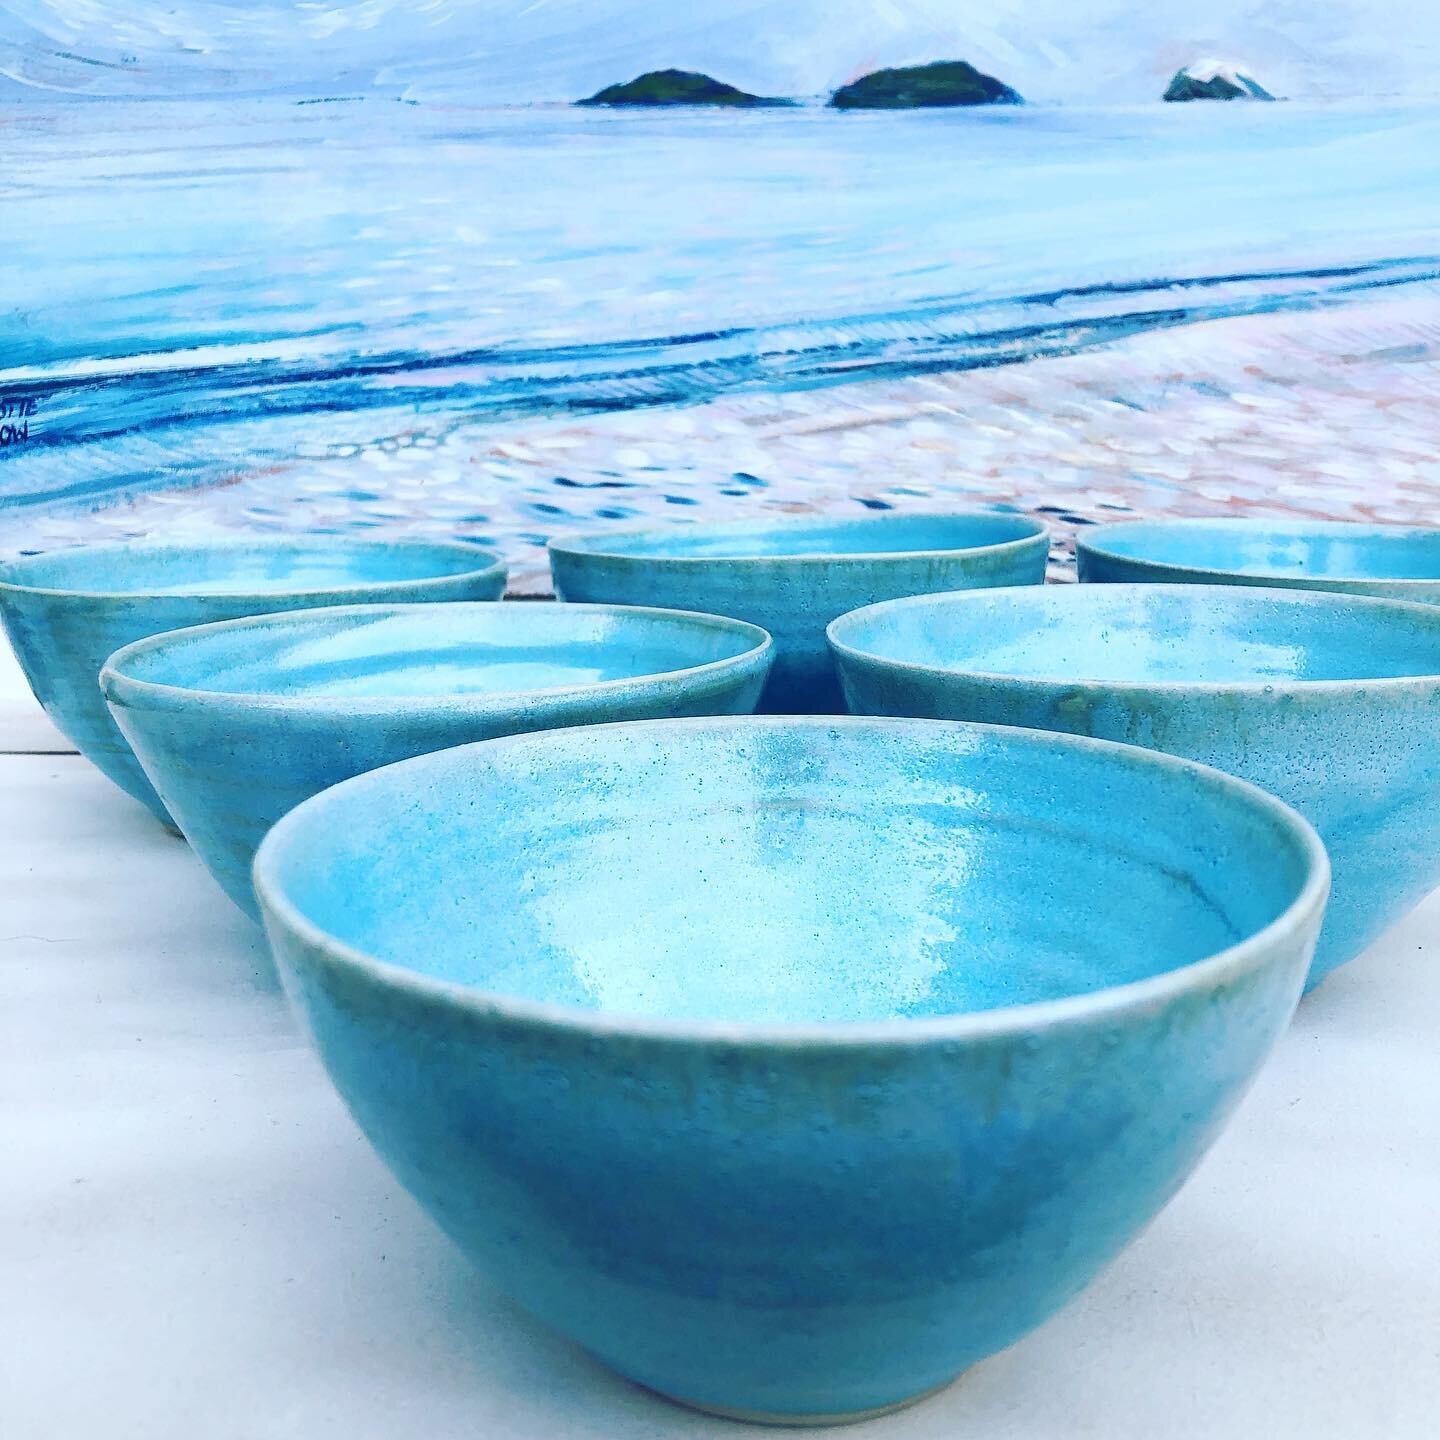 🔹🔷New Turquoise Blue 🔷🔹Bowls out of the kiln this morning , pictured here with my Yellowcraigs Beach Painting 😁#eastlothianartist#ScottishArtist ##ScottishCraft  #Handmade #Ceramics #StonewareClay #turquoiseblue#Ceramics#MadeWithLove#pottery#cer